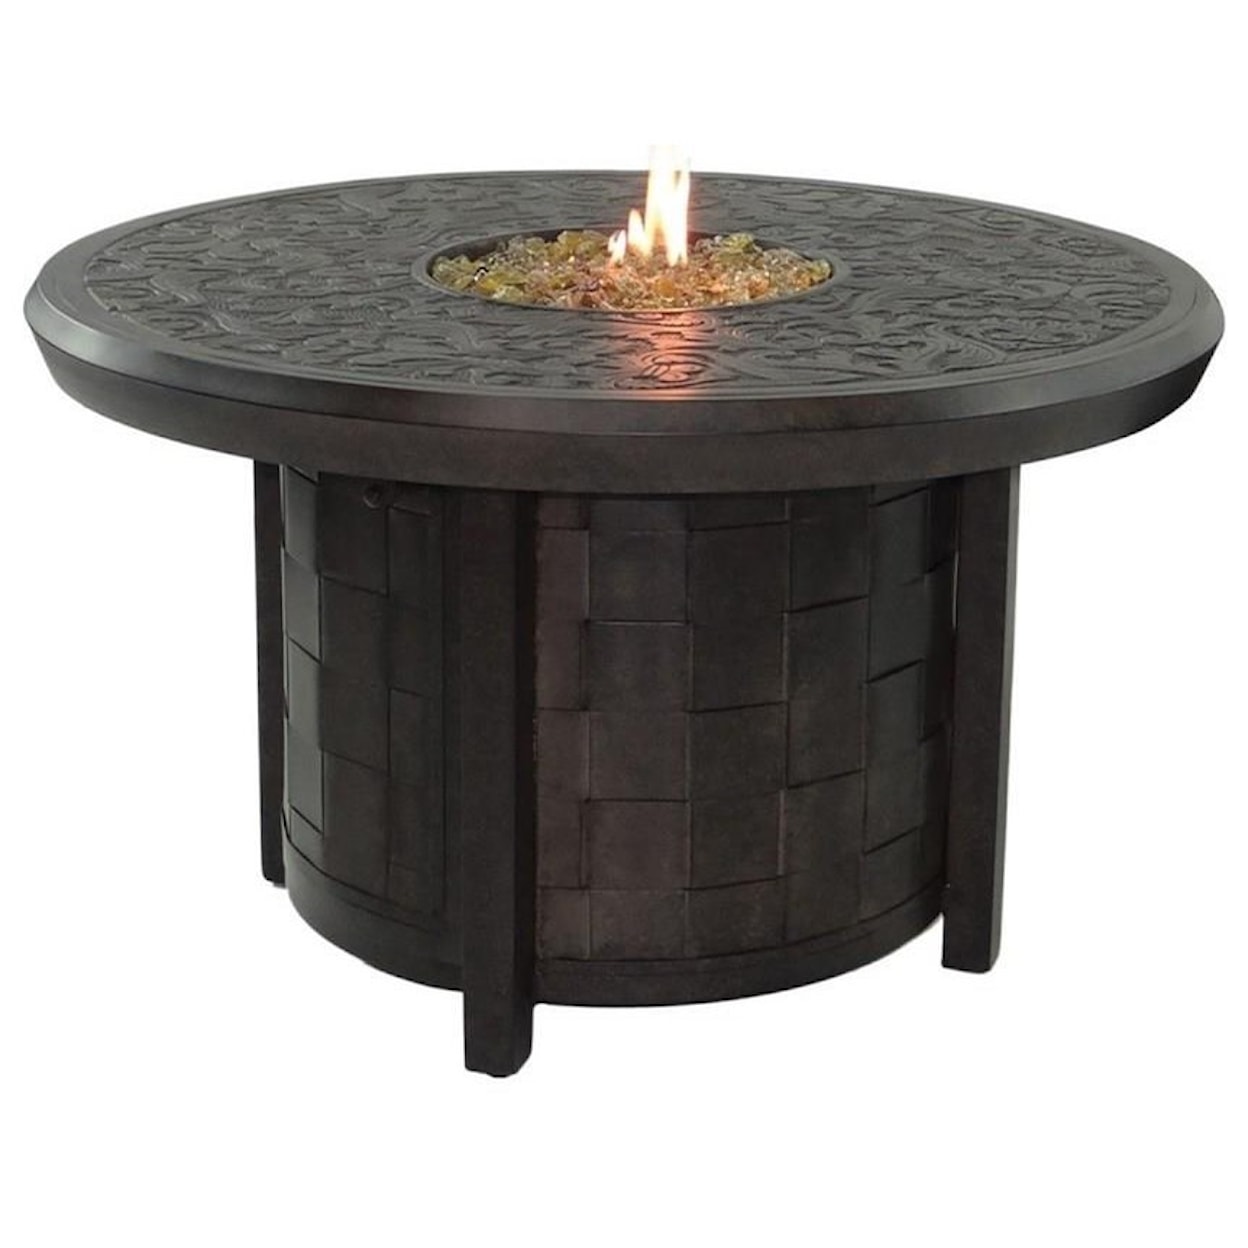 Castelle by Pride Family Brands Classical Firepits 40" Round Firepit w/ Lid